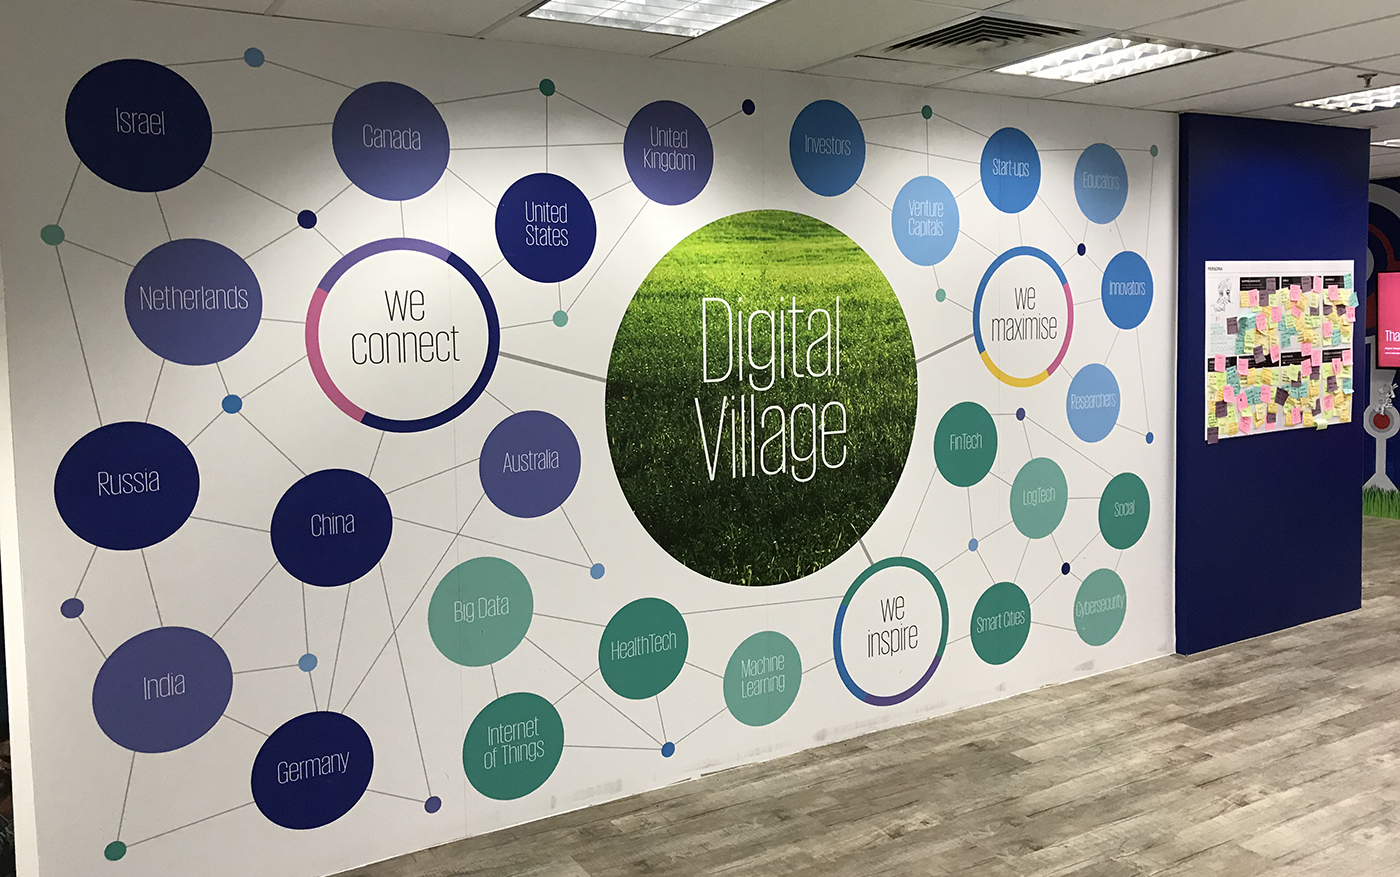 KPMG Digital Village launches KrisPay with Singapore Airlines